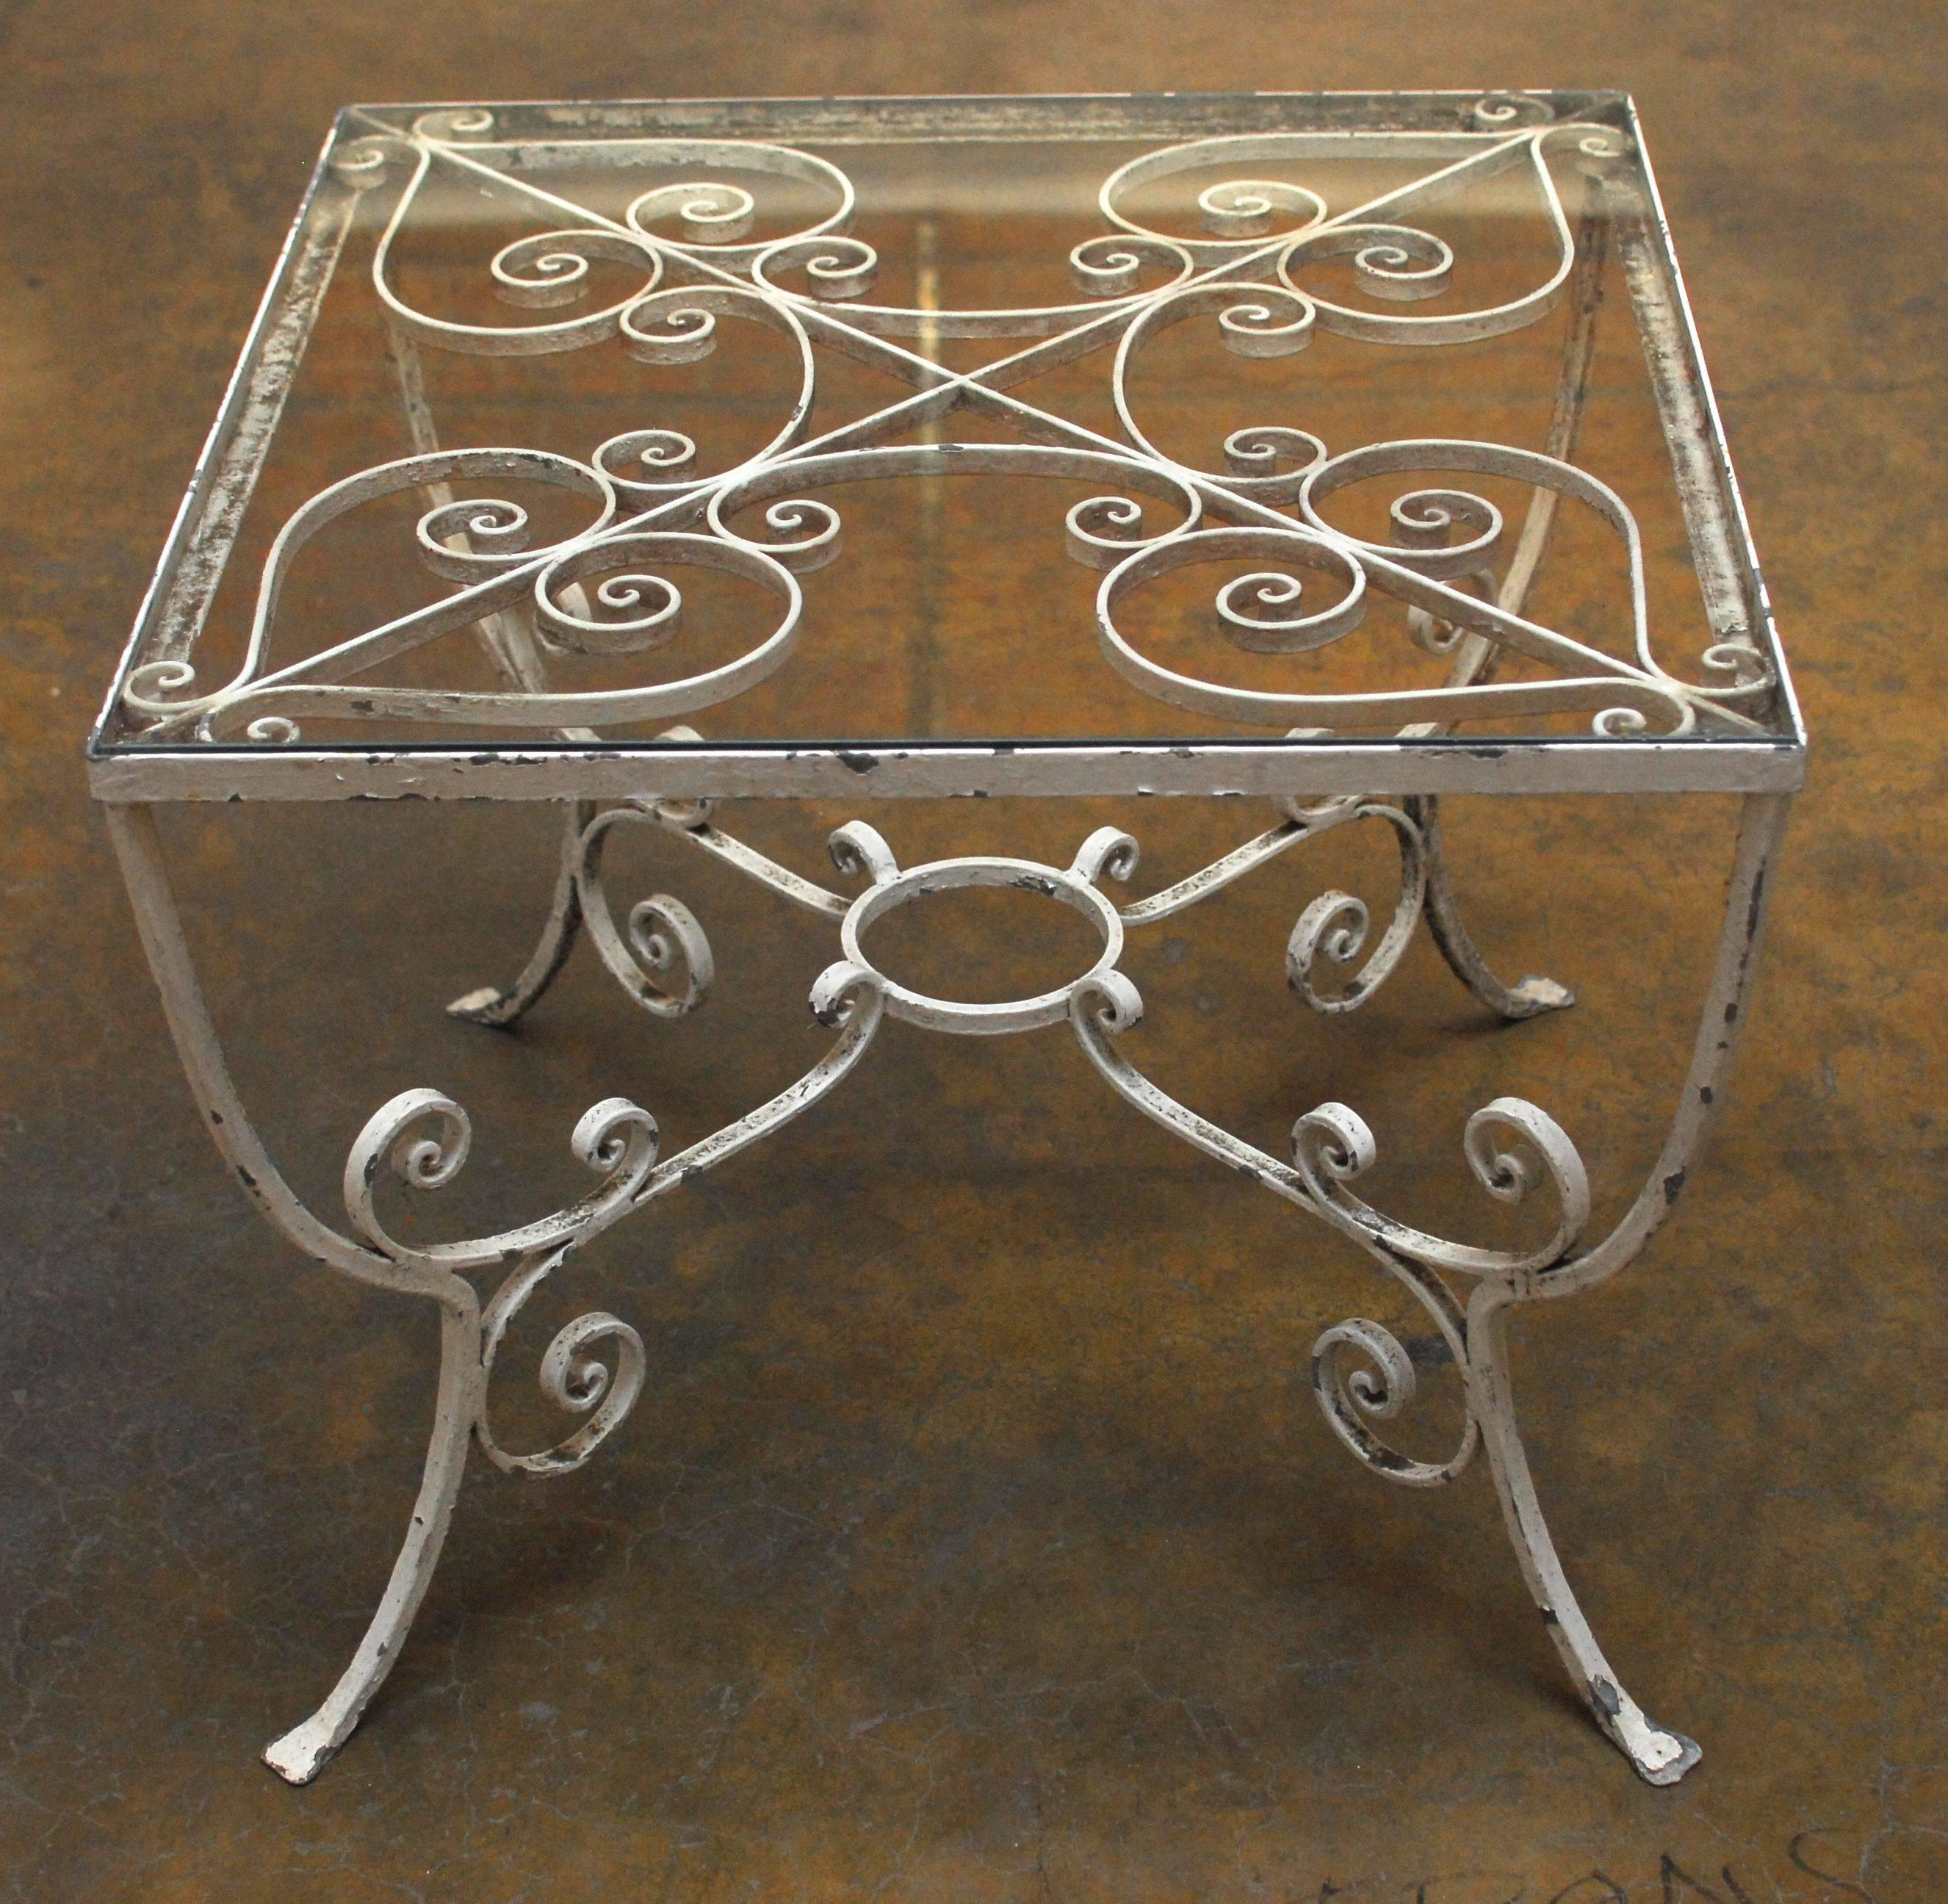 Hand-Crafted French Wrought Iron Patio Set